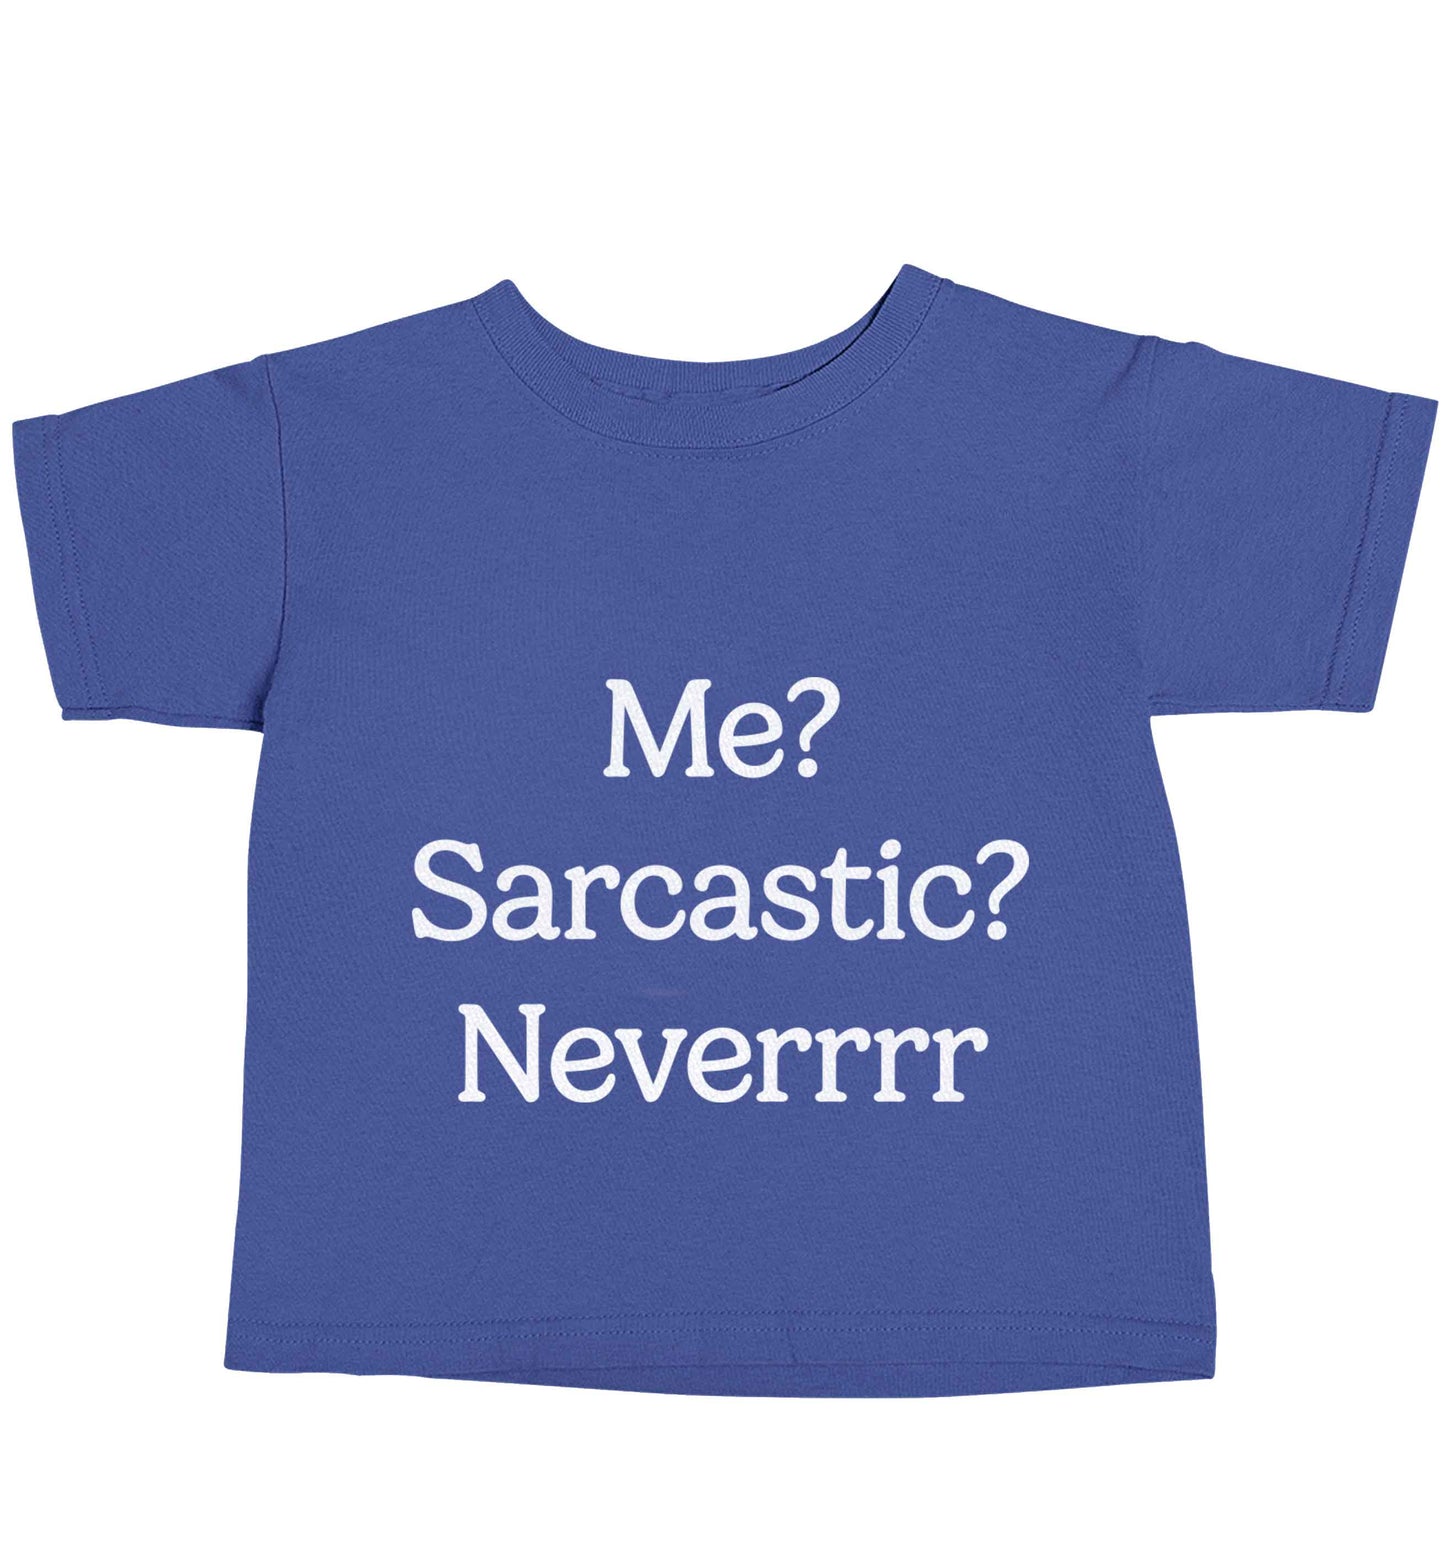 Me? sarcastic? never blue baby toddler Tshirt 2 Years